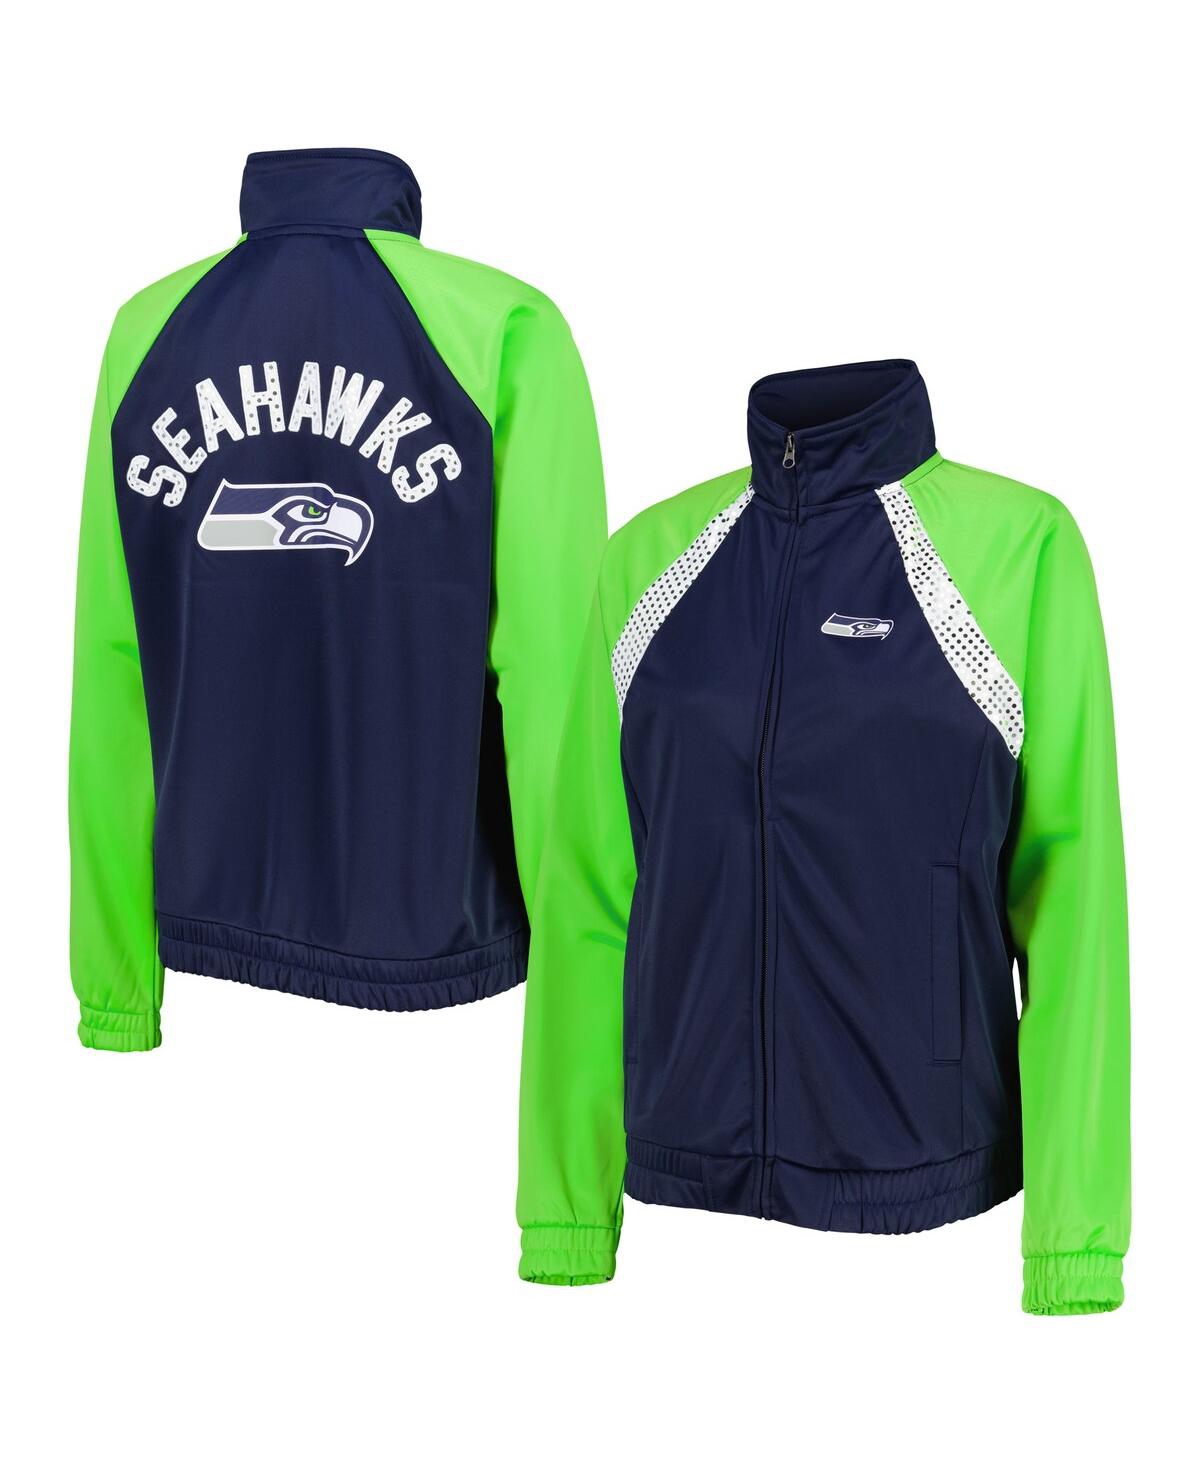 Women's G-iii 4Her by Carl Banks College Navy and Neon Green Seattle Seahawks Confetti Raglan Full-Zip Track Jacket - Navy, Neon Green